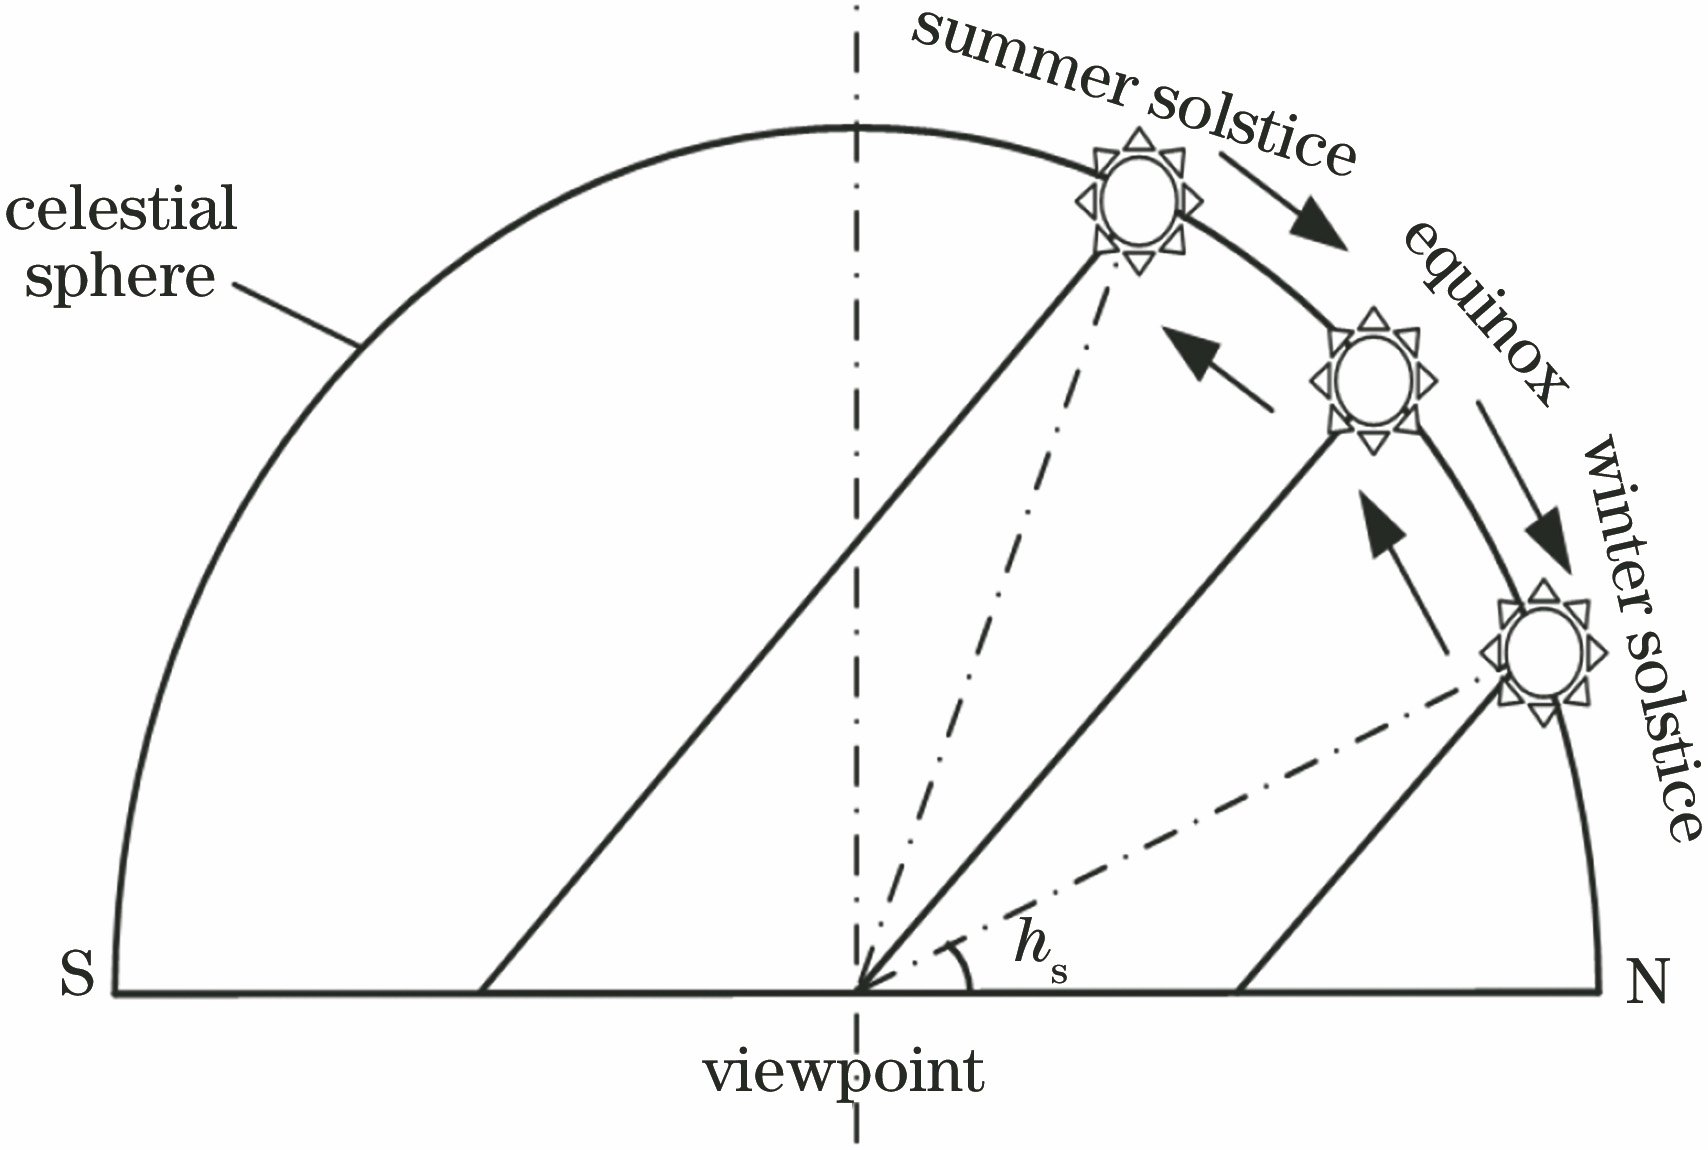 Two-dimensional model of global solar direct radiation angle variation